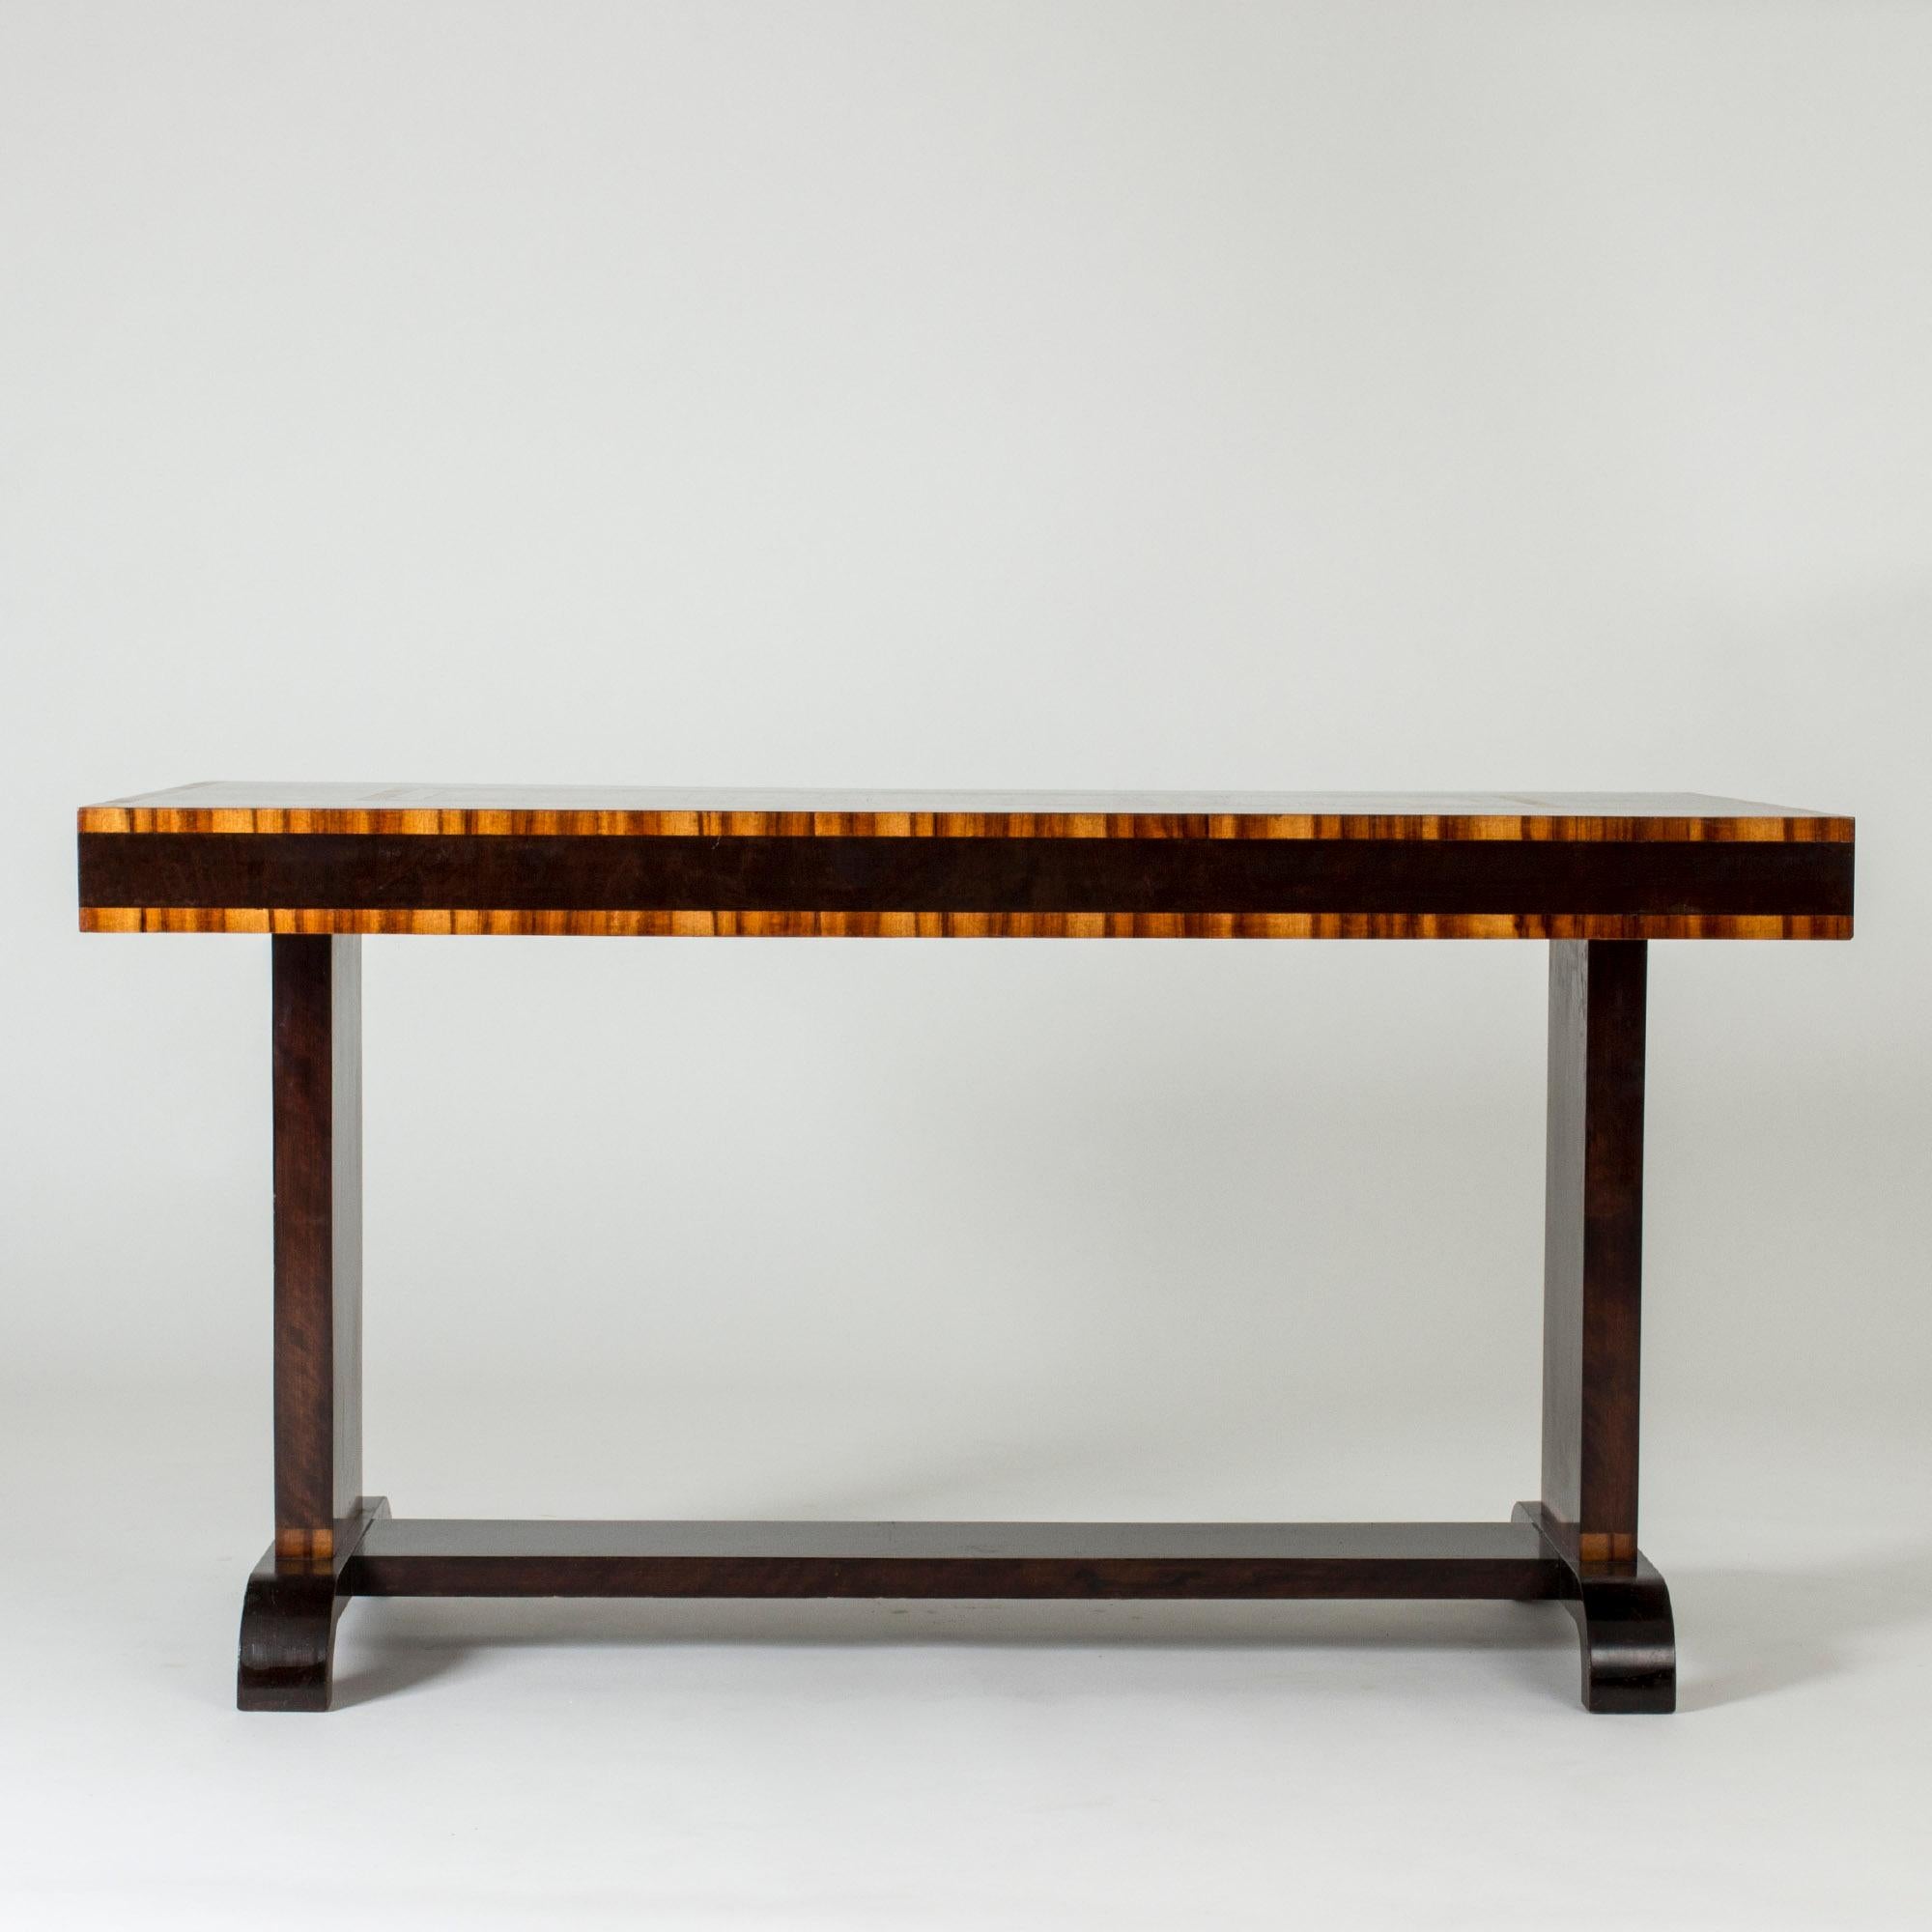 Swedish Desk with Inlays, Axel Larsson, Bodafors, Sweden, 1930s